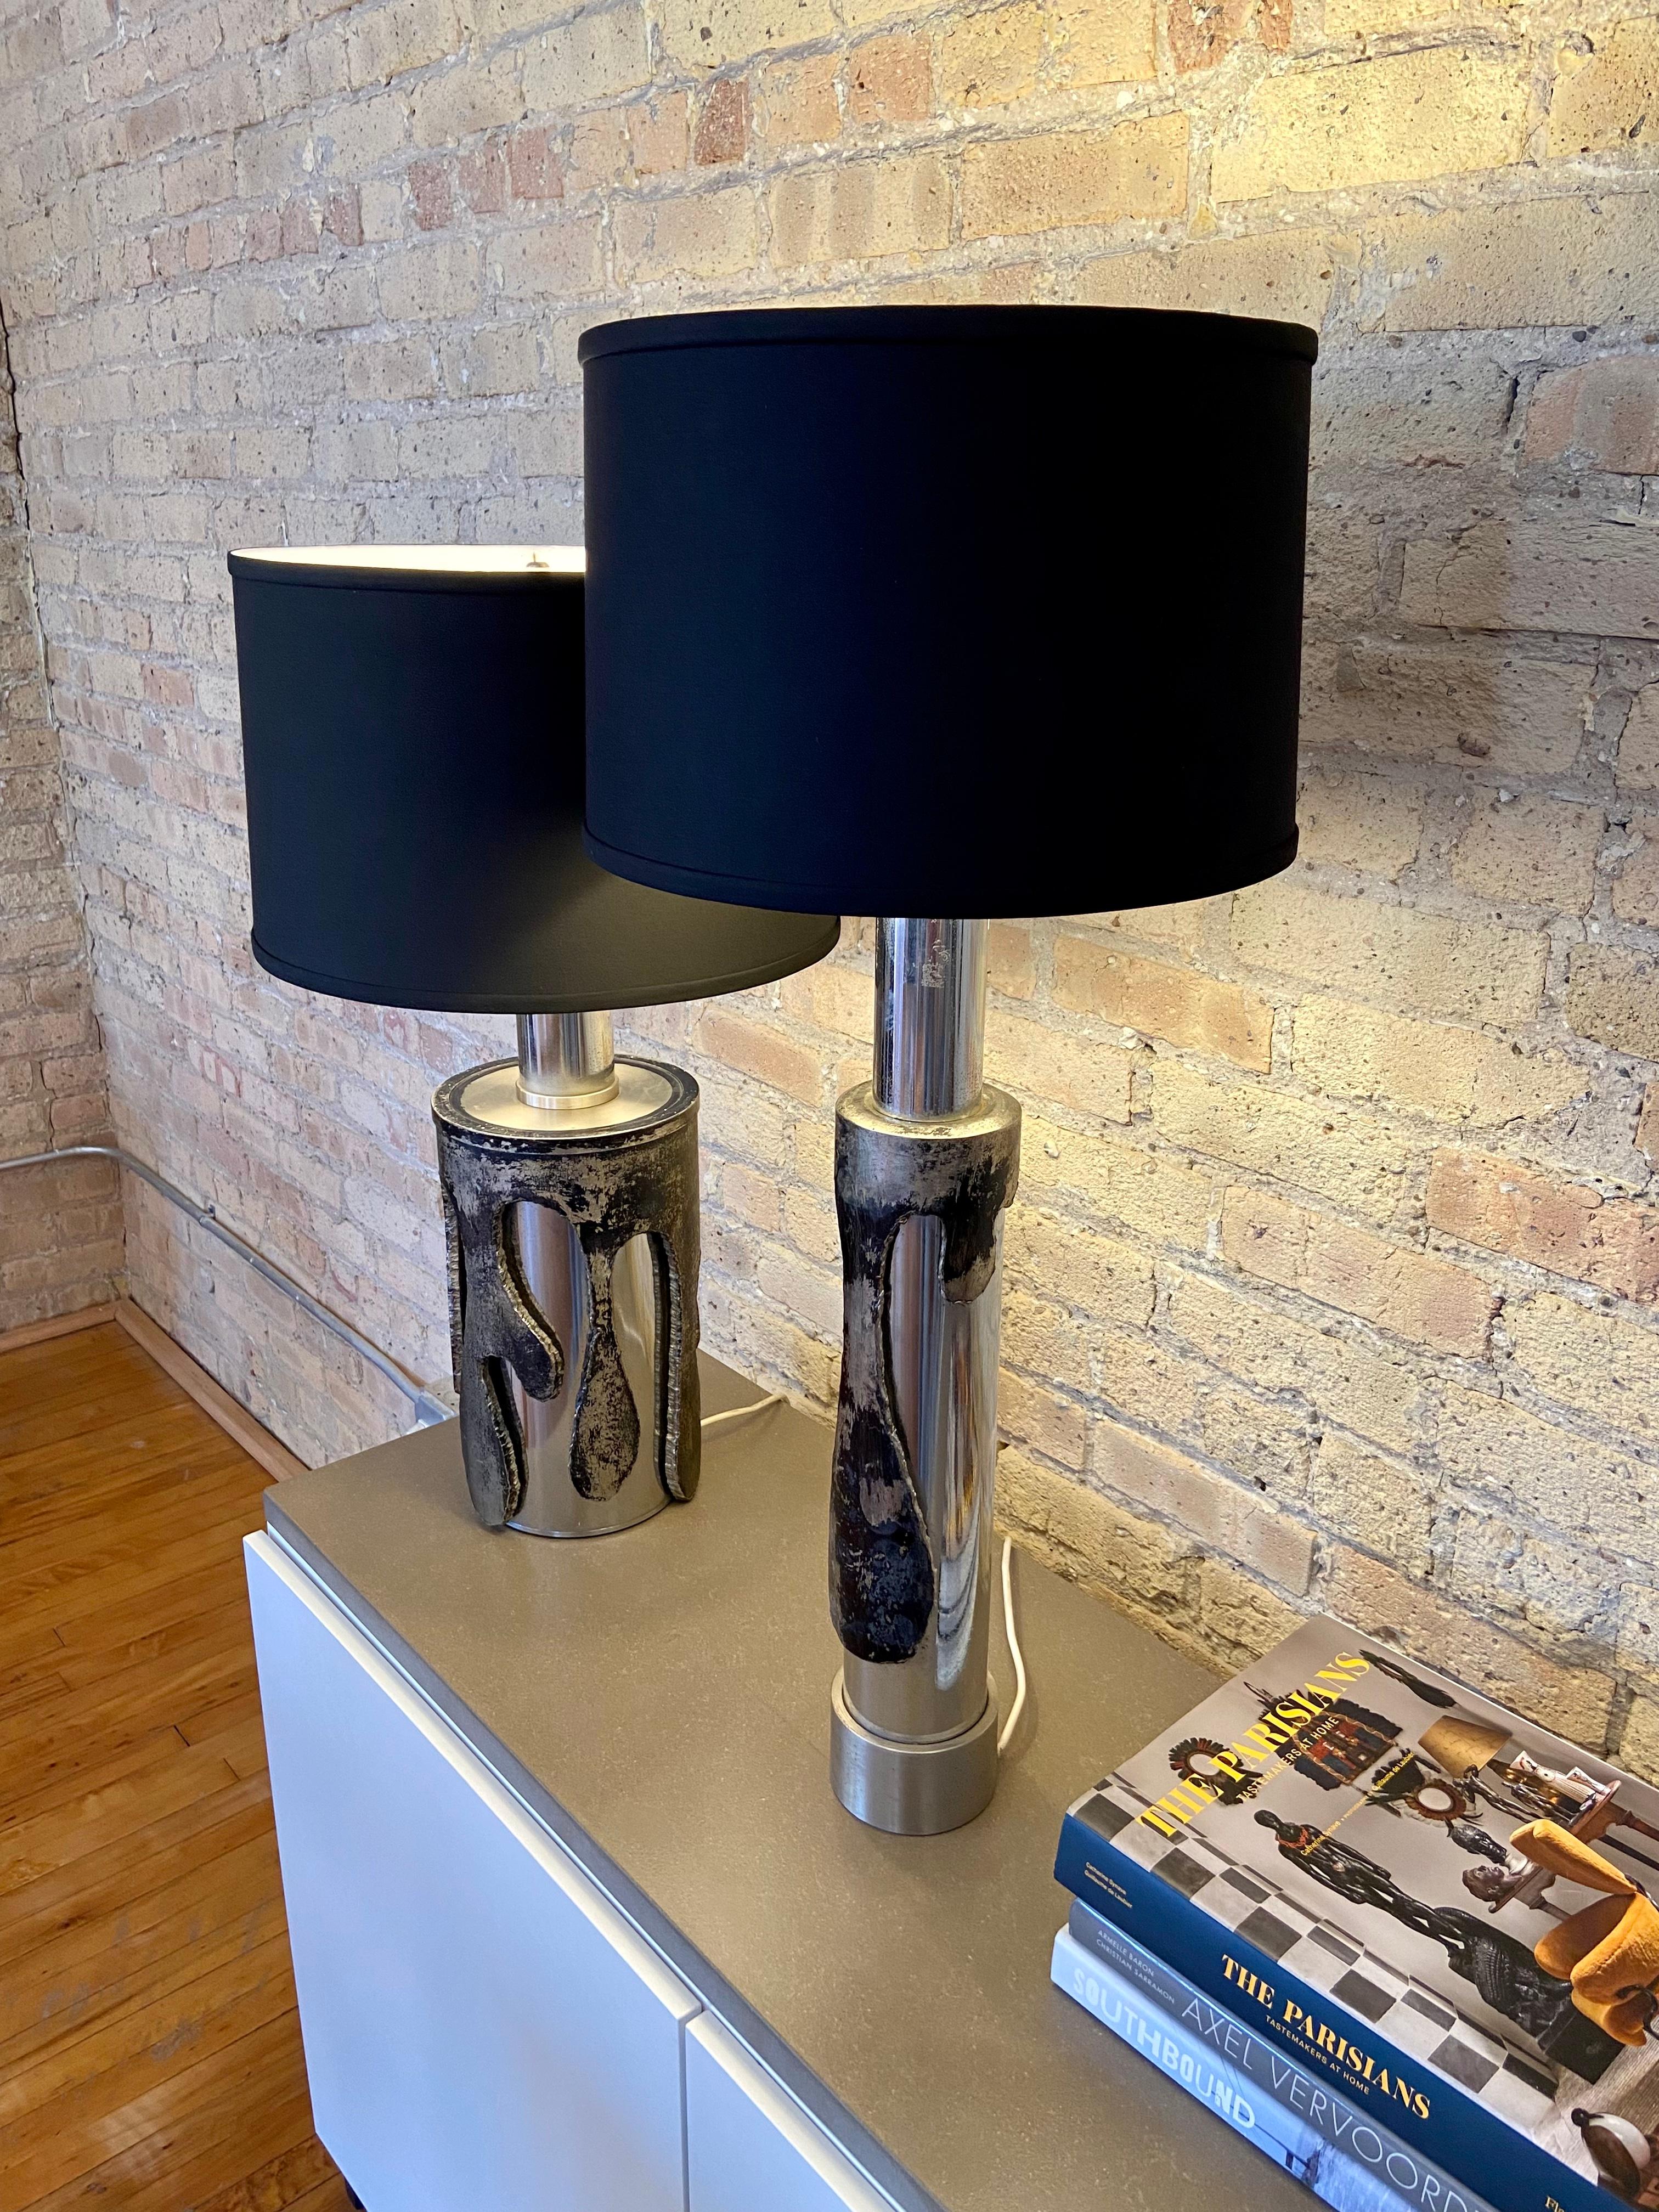 Pair of chrome metal table lamps designed by Marcello Fantoni

Tall Lamp: H: 27.5 in x W 4.3 in x D 4.3 in 
Short lamp: H 22 in x W 7 in 

Lamp shades included

Marcello Fantoni was a Florentine artist who specialized in ceramics. He studied